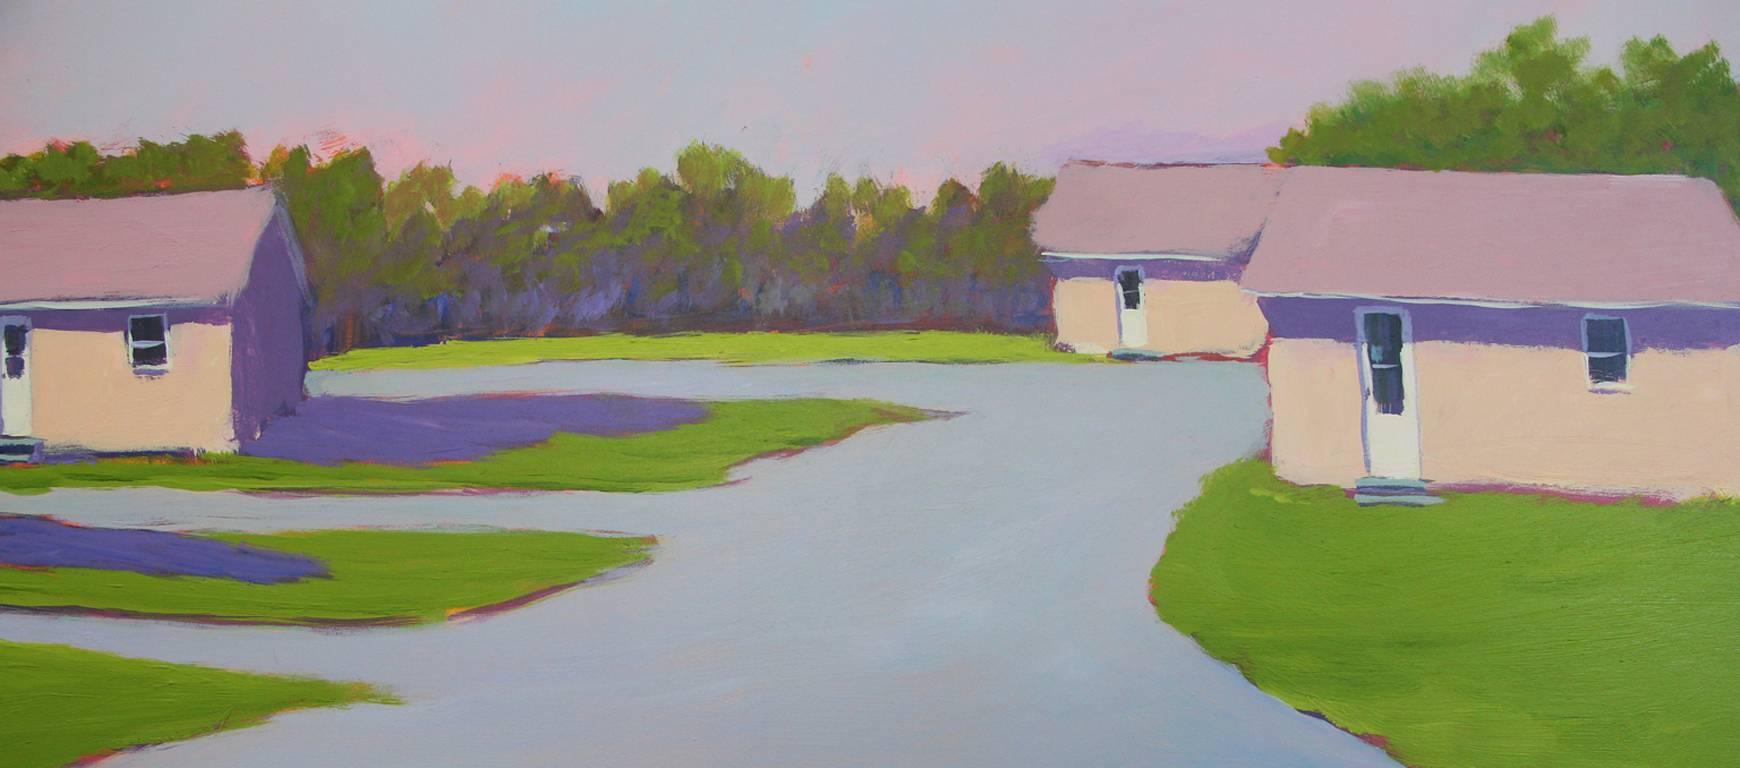 This contemporary landscape painting by Carol Young features a cool, vibrant painting and a horizontal format. It depicts small cottages with light, warm purple roof tops under a pink sky, and surrounded by green foliage and grass. The small houses